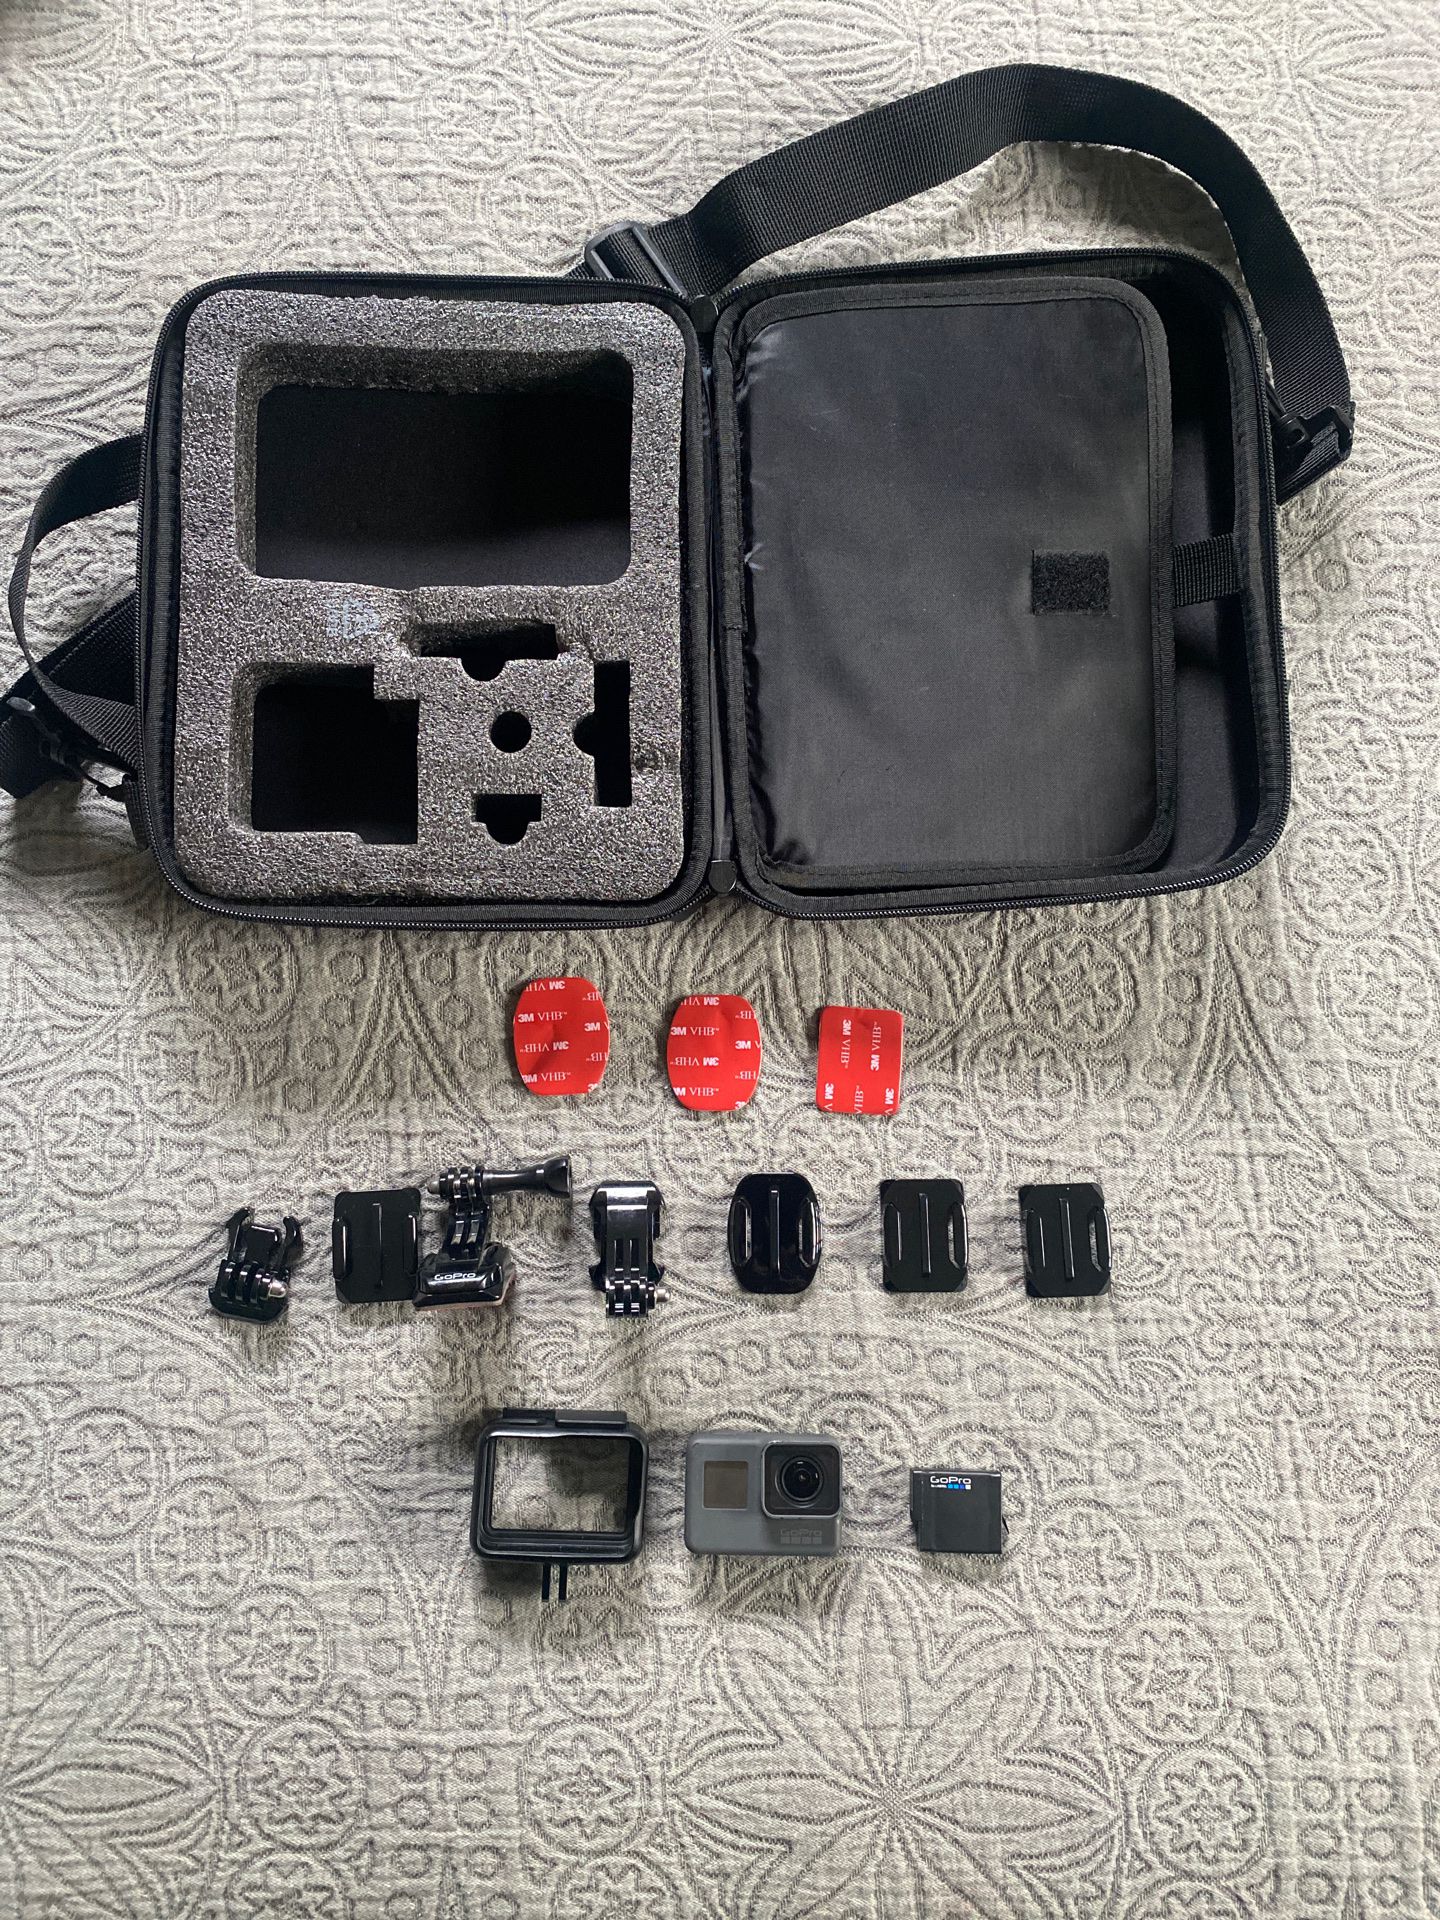 GoPro Hero 5 Black, With bag and Accessories